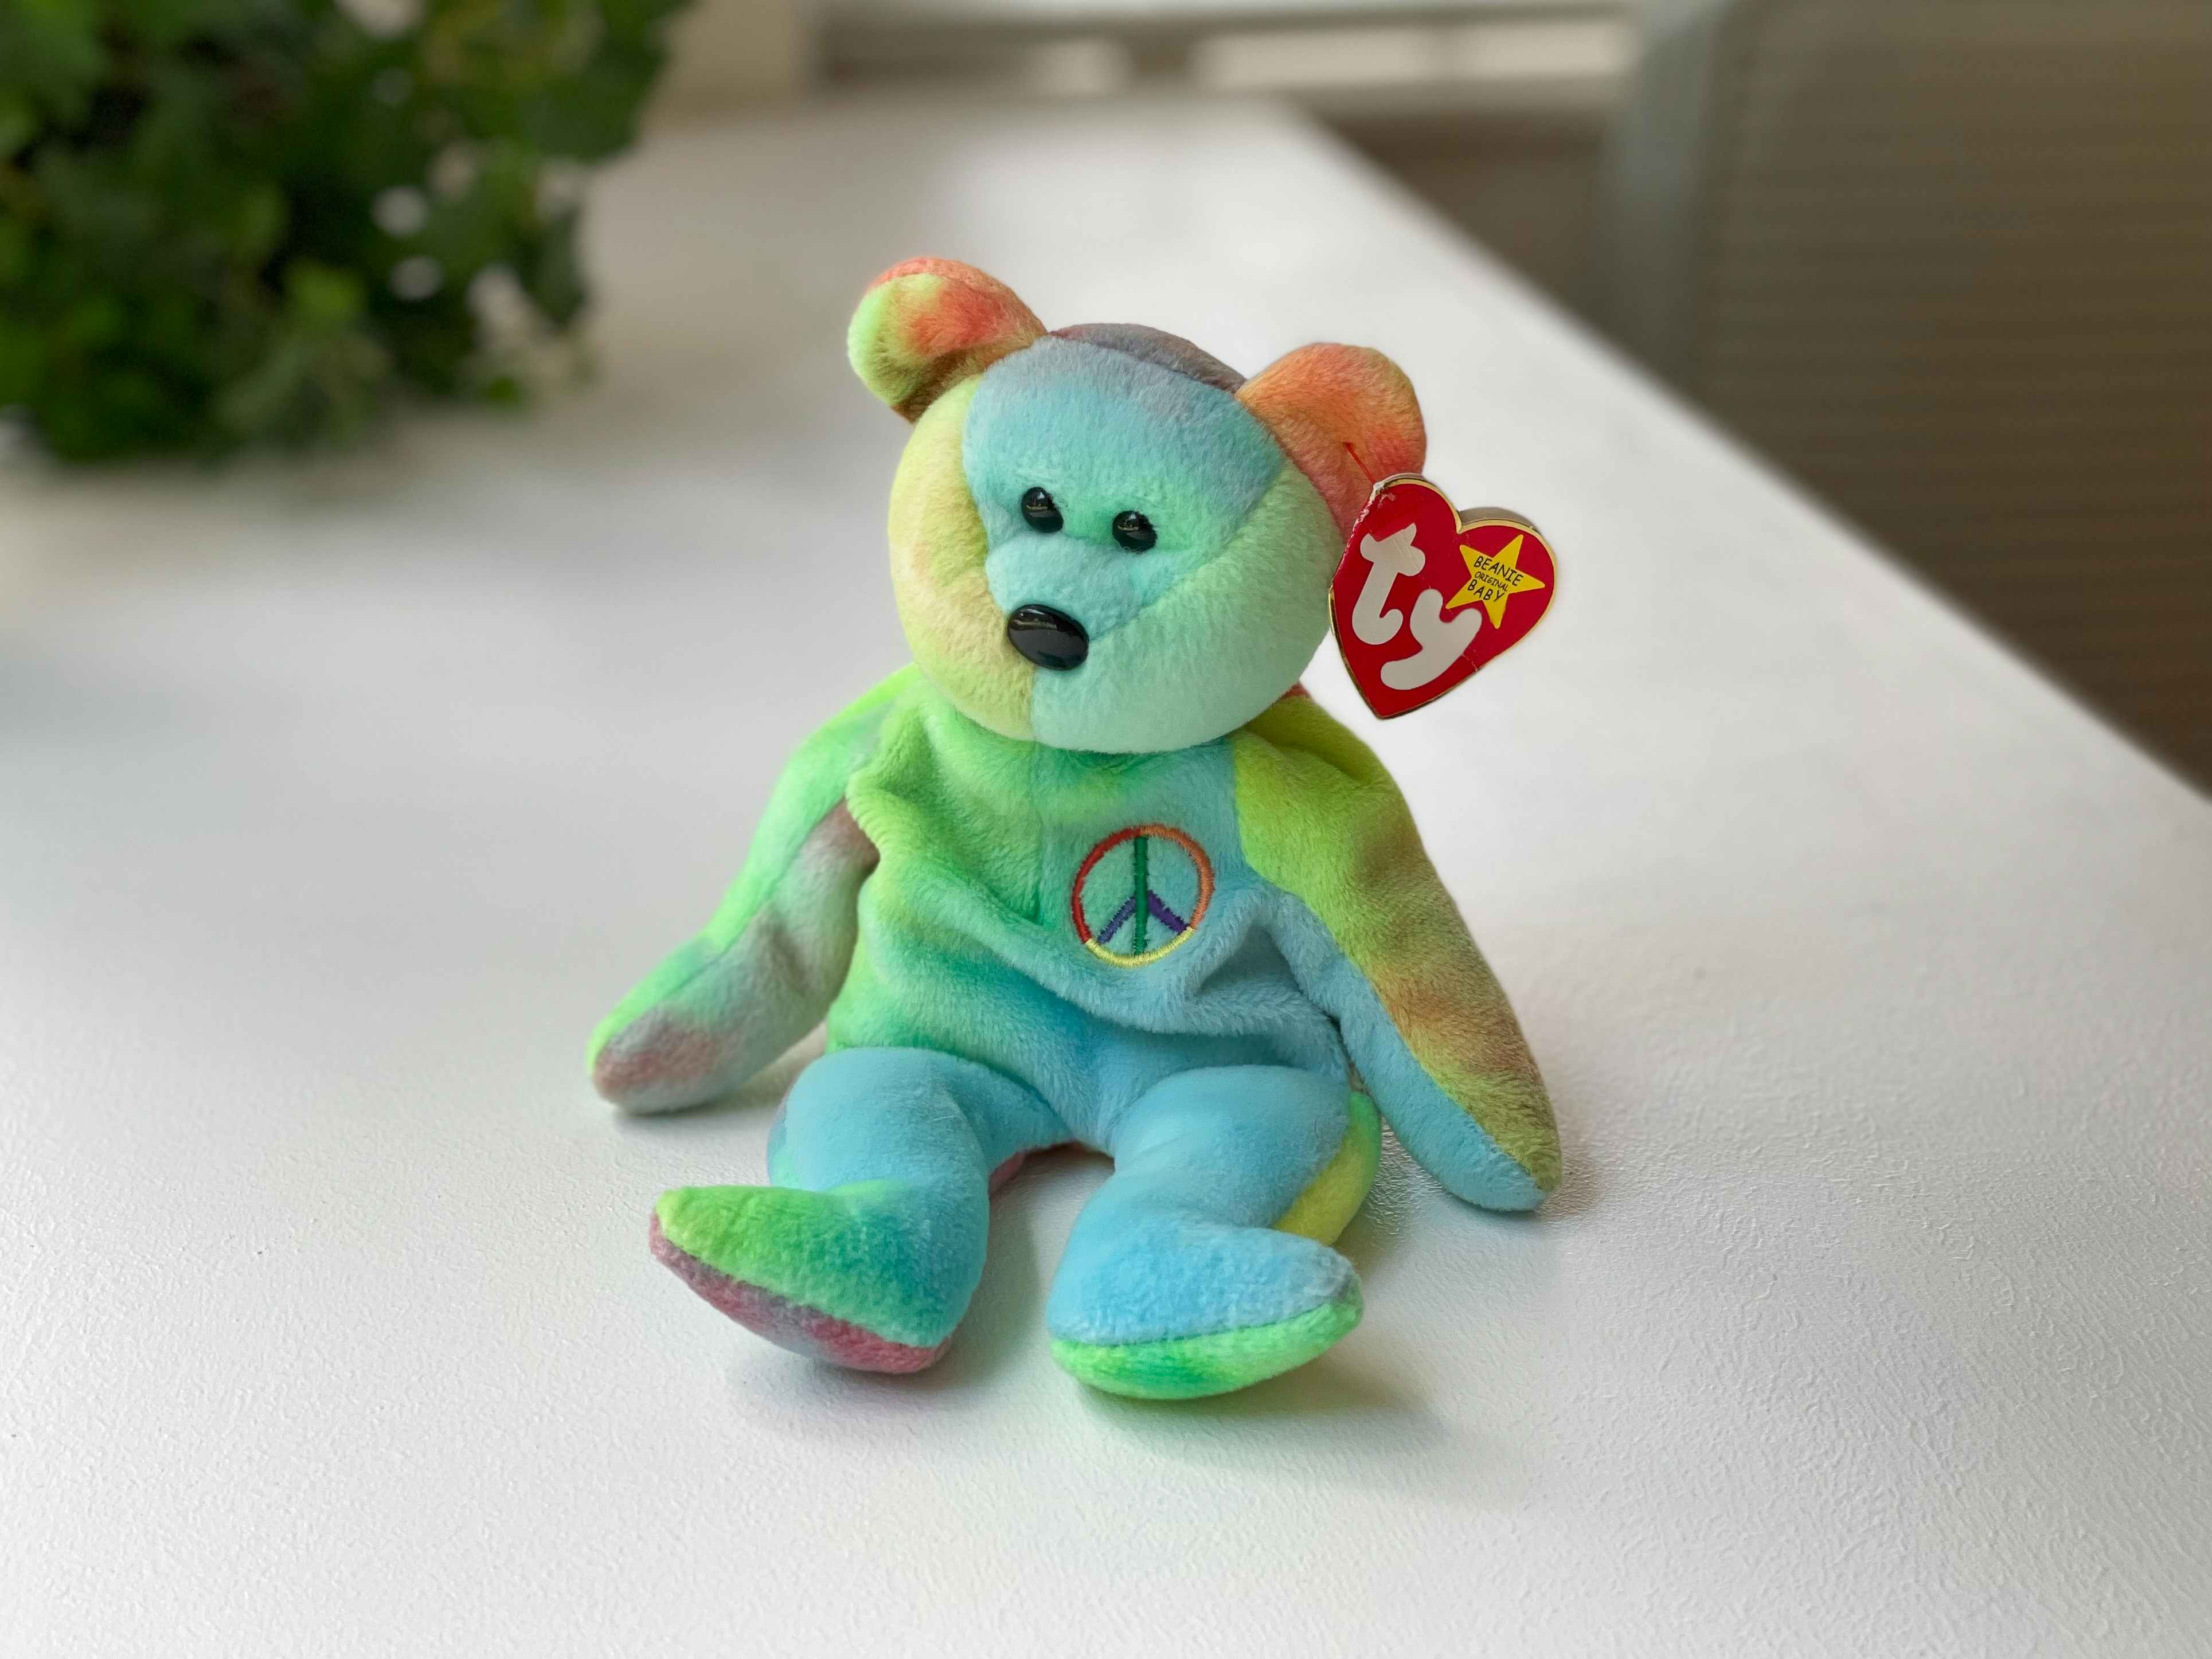 The Original DOODLE BEAR. Released in 1995, commercial from 1996